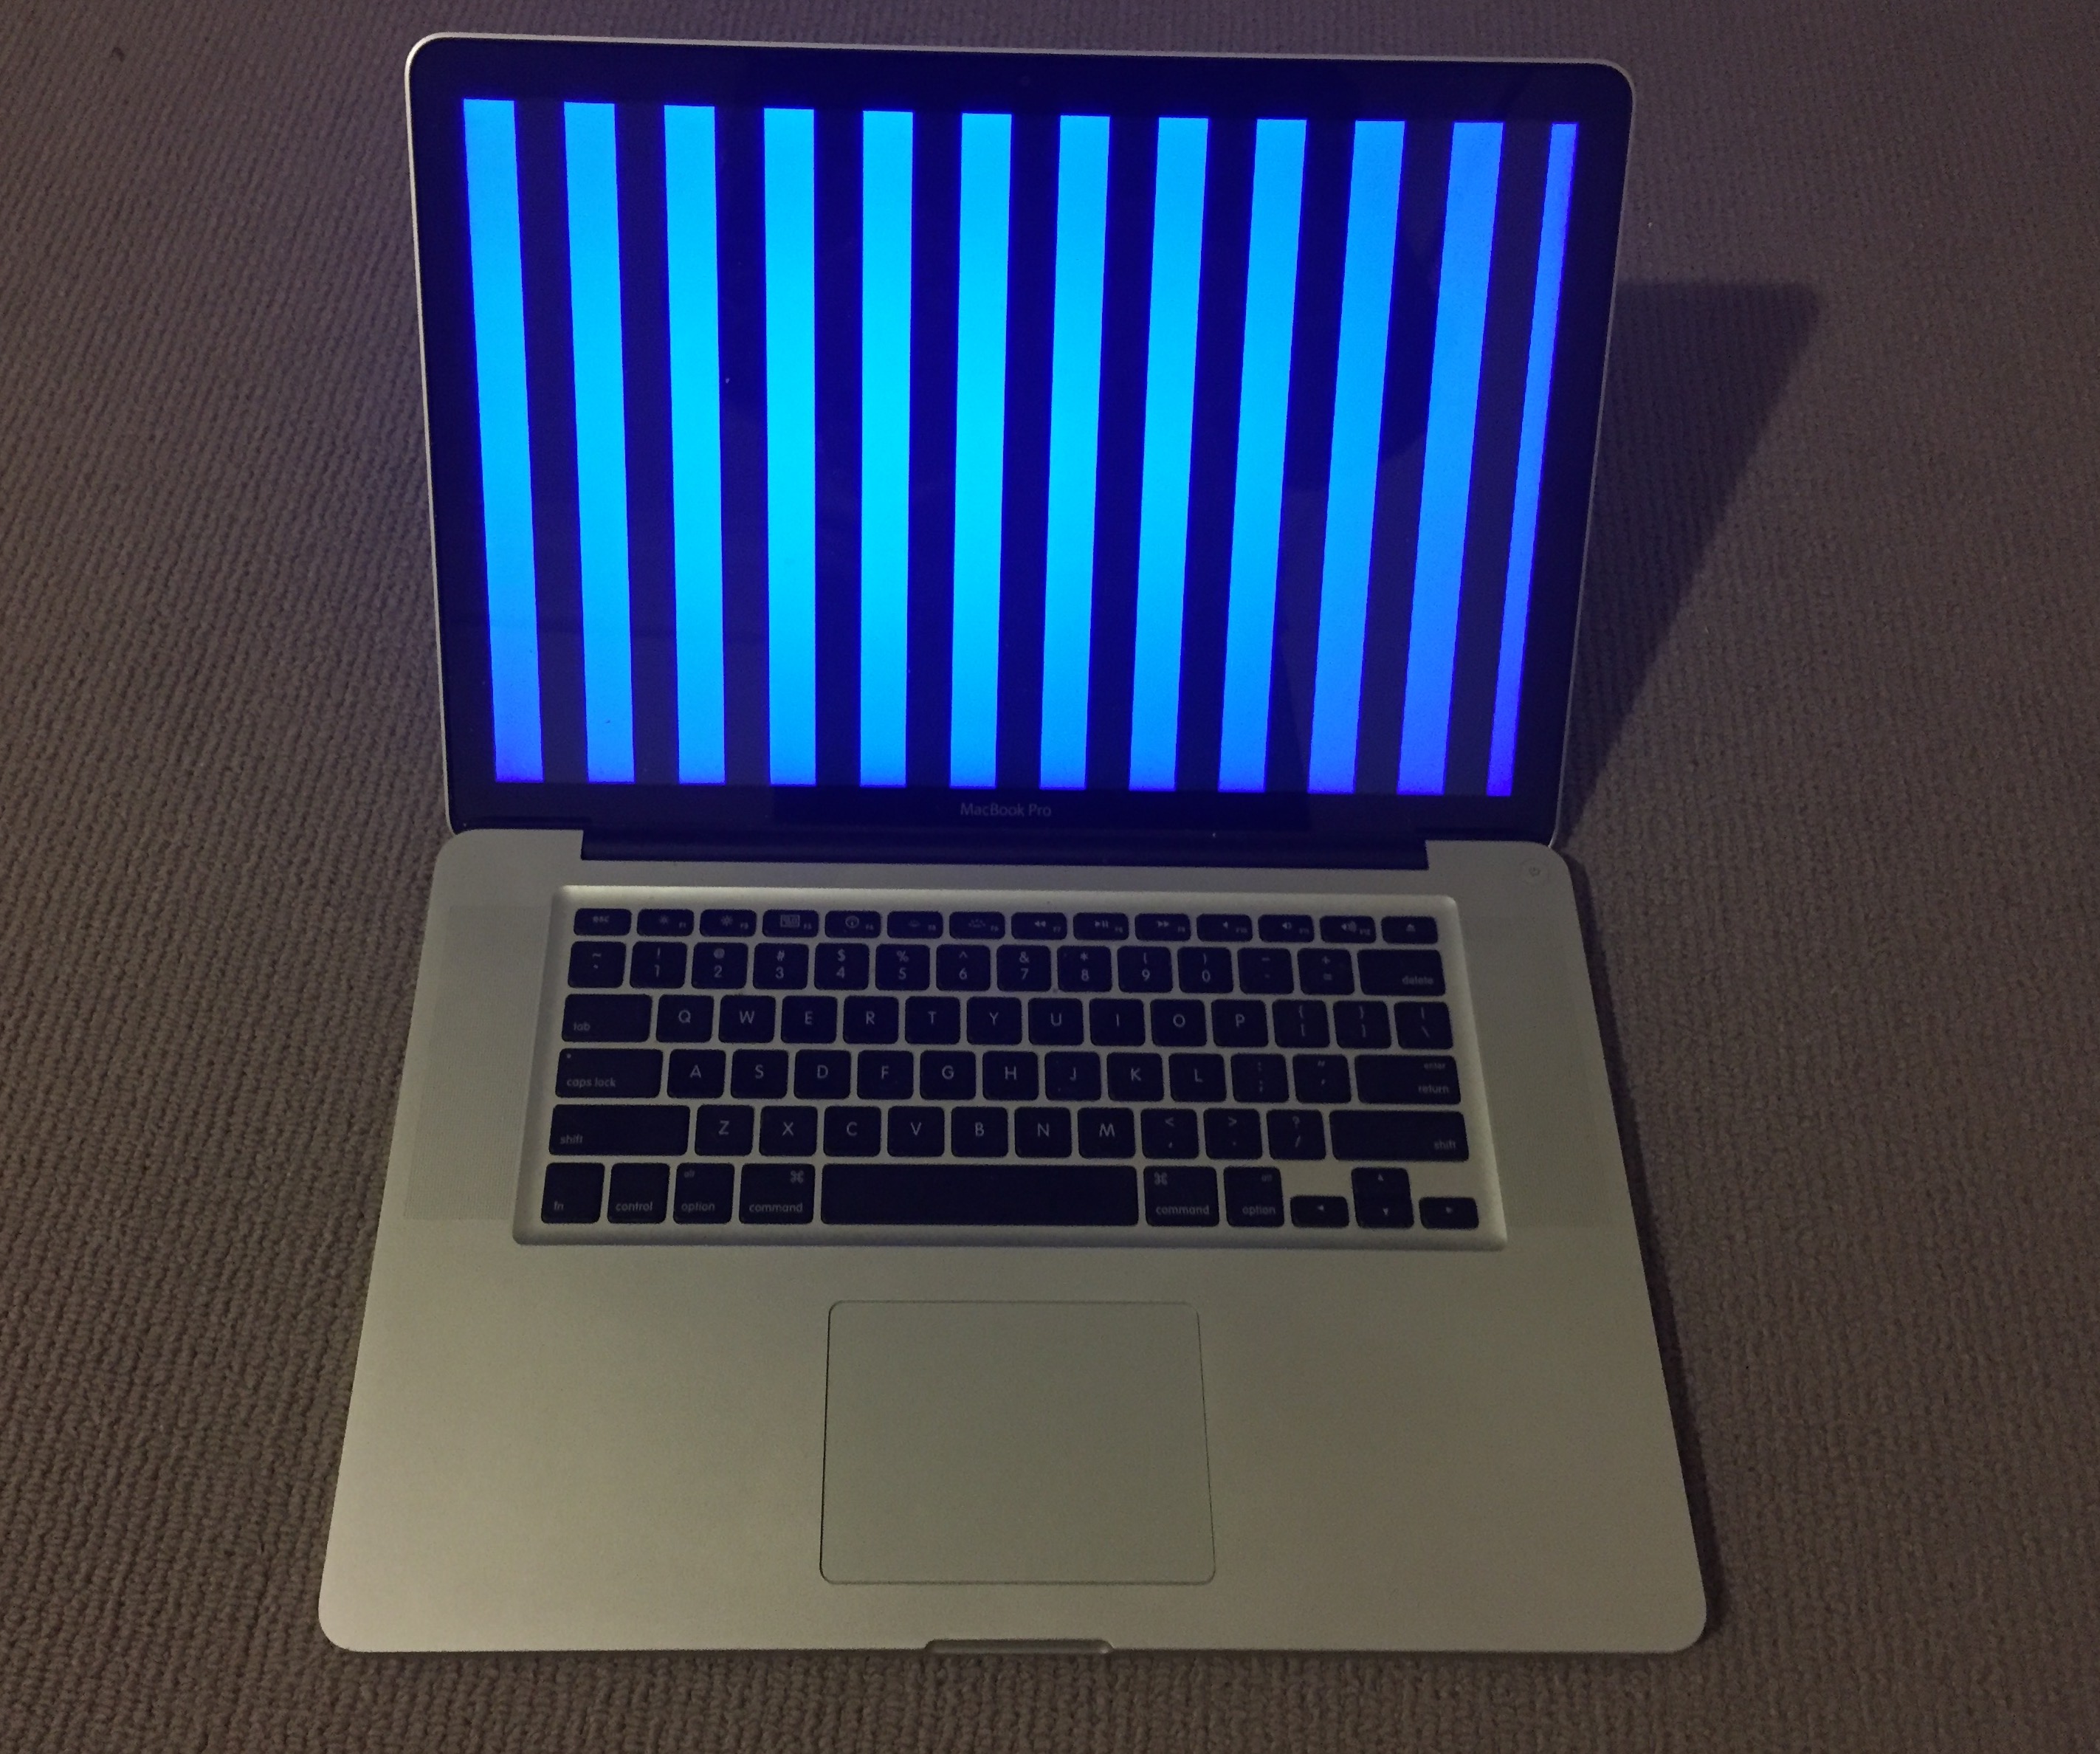 17 inch macbook pro 2011 graphics card issue